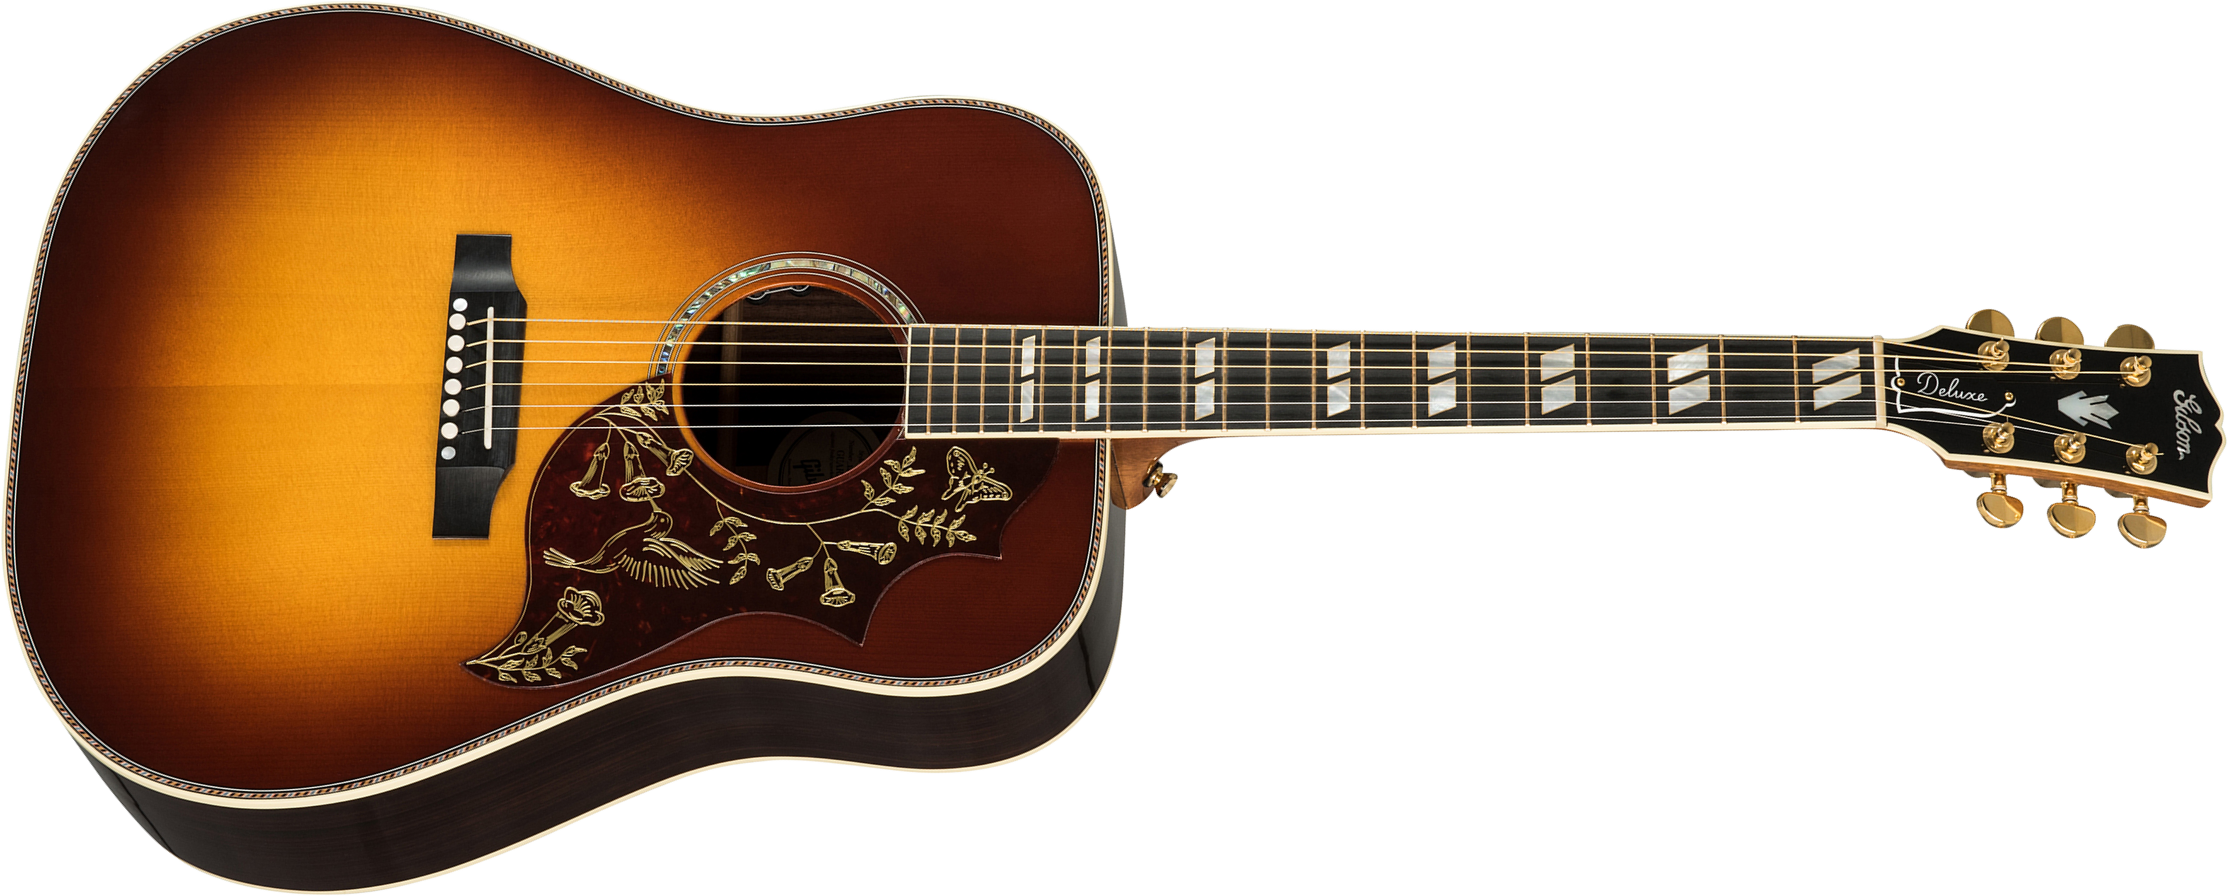 Gibson Custom Shop Hummingbird Deluxe Dreadnought Epicea Palissandre Eb - Rosewood Burst - Electro acoustic guitar - Main picture